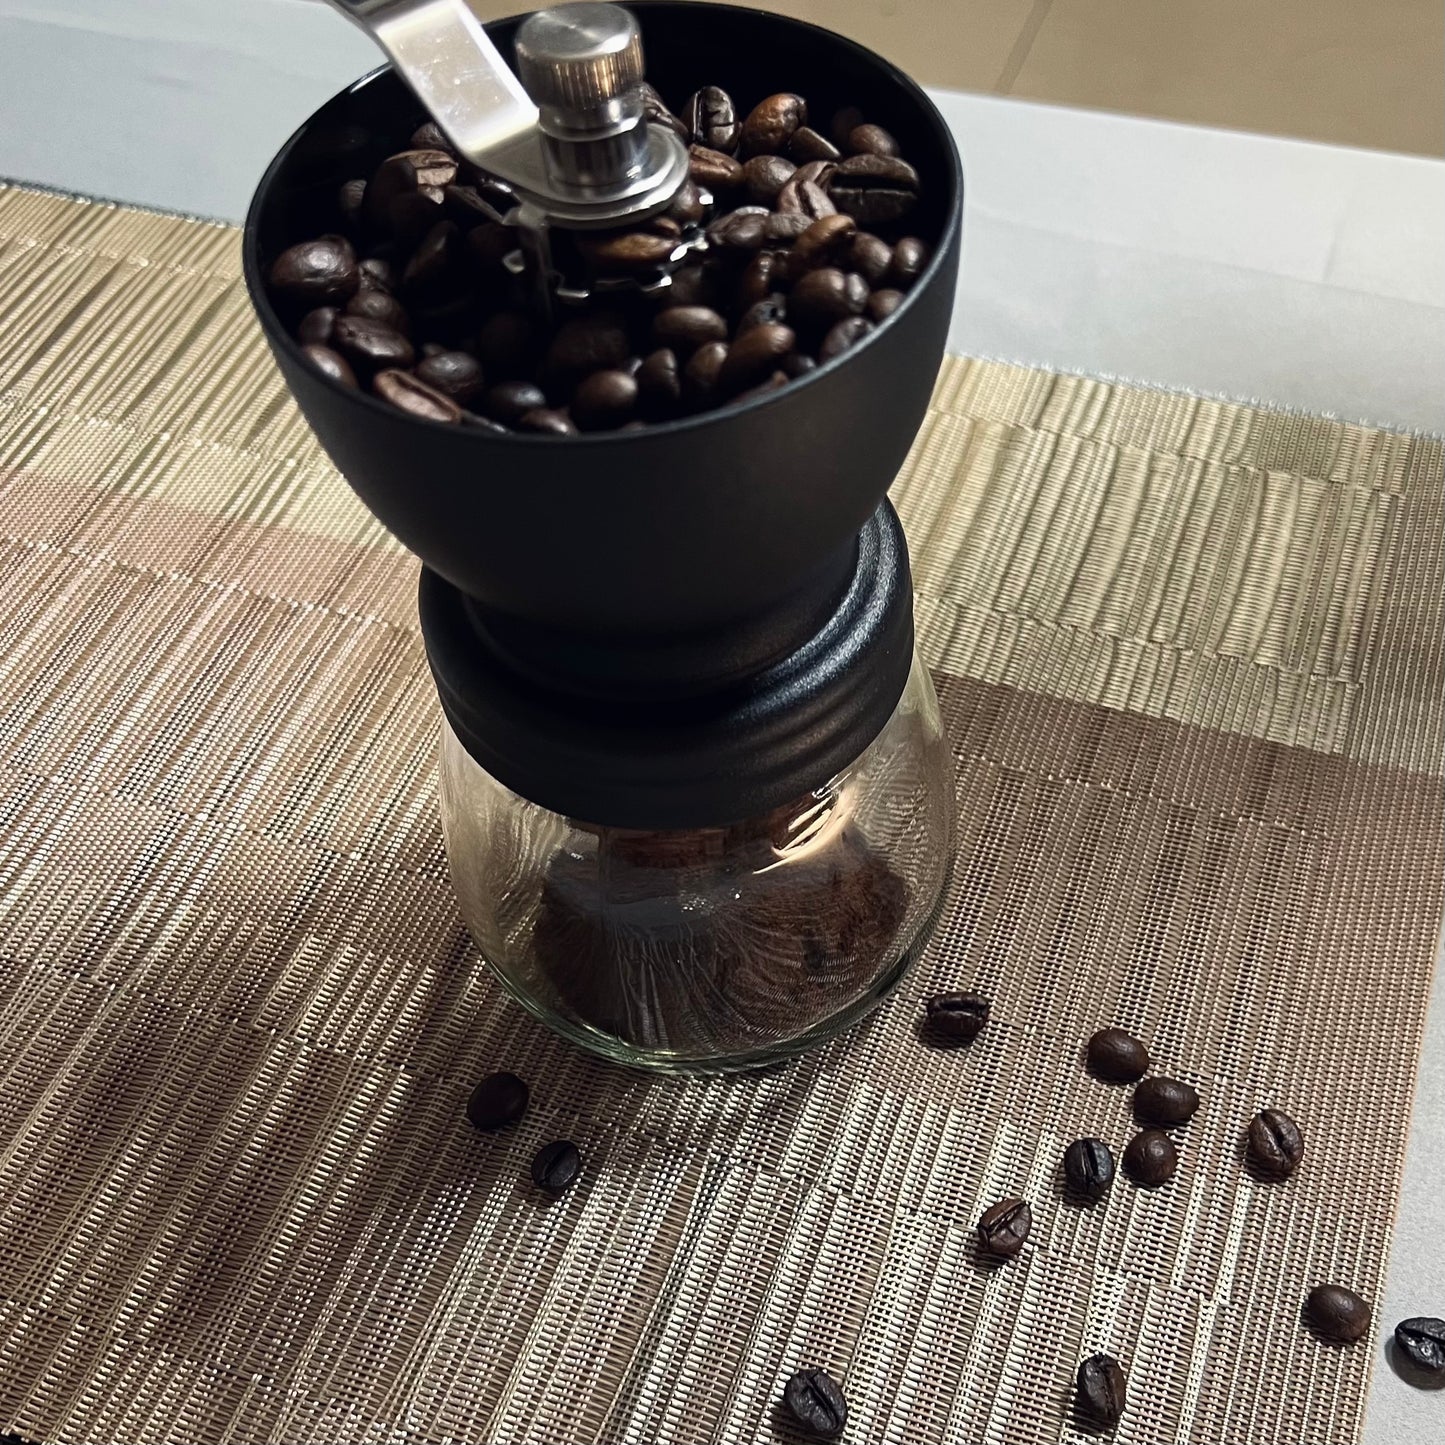 Manual Coffee Grinder with Ceramic Burr for Beans, Espresso, and Spices - Portable Hand Crank Mill with 2 Glass Jars